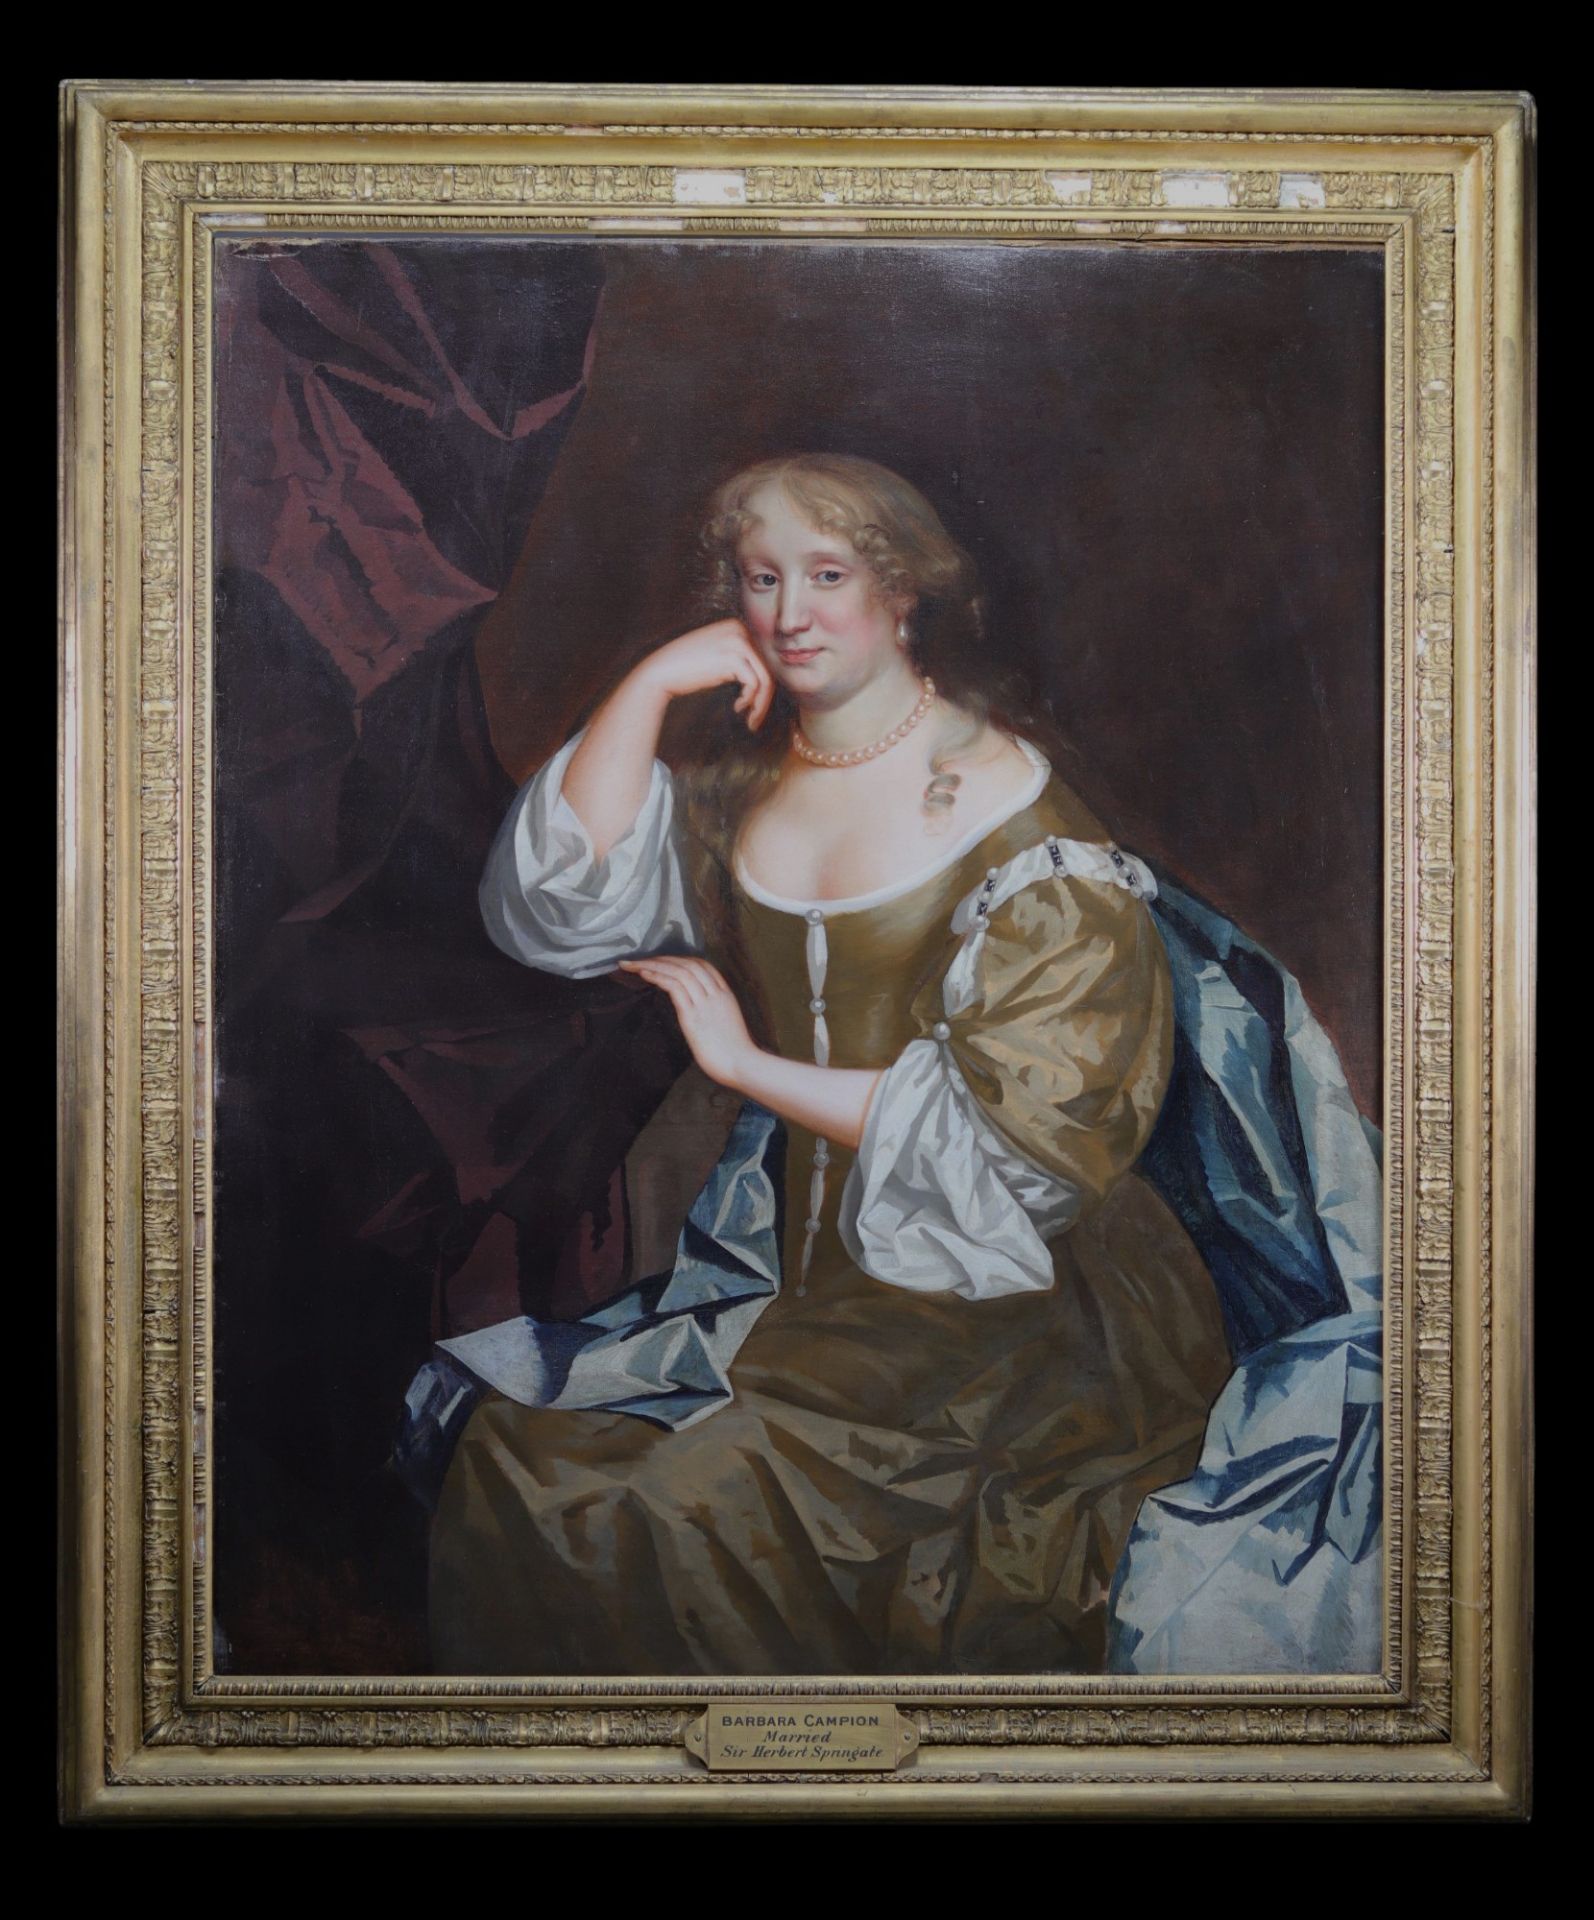 Portrait of "Barbara Campion wife of Sir Herbert Springale" Large oil on canvas, 18th century.